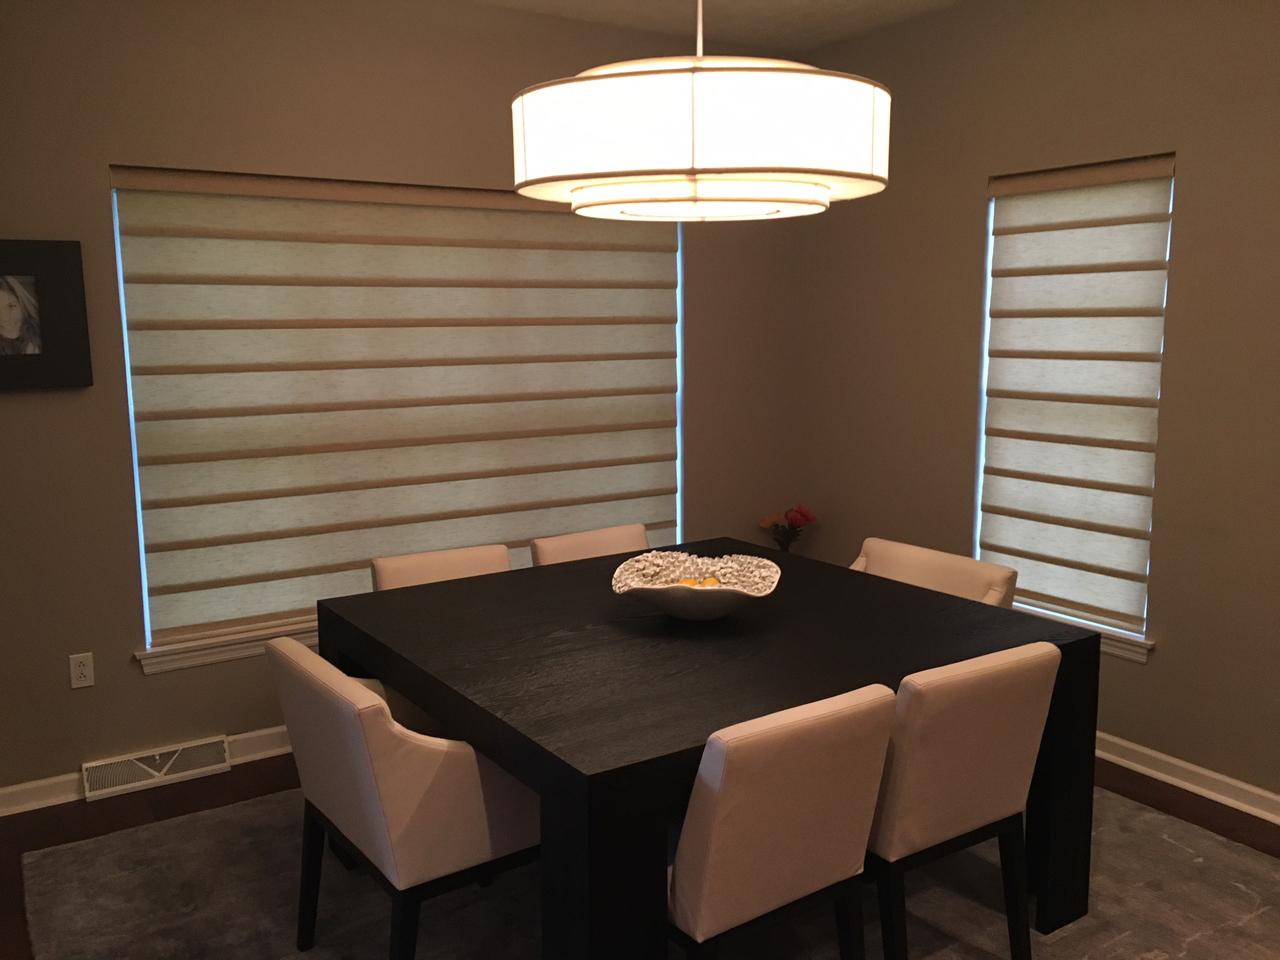 Vignette Roman Shades in dining room